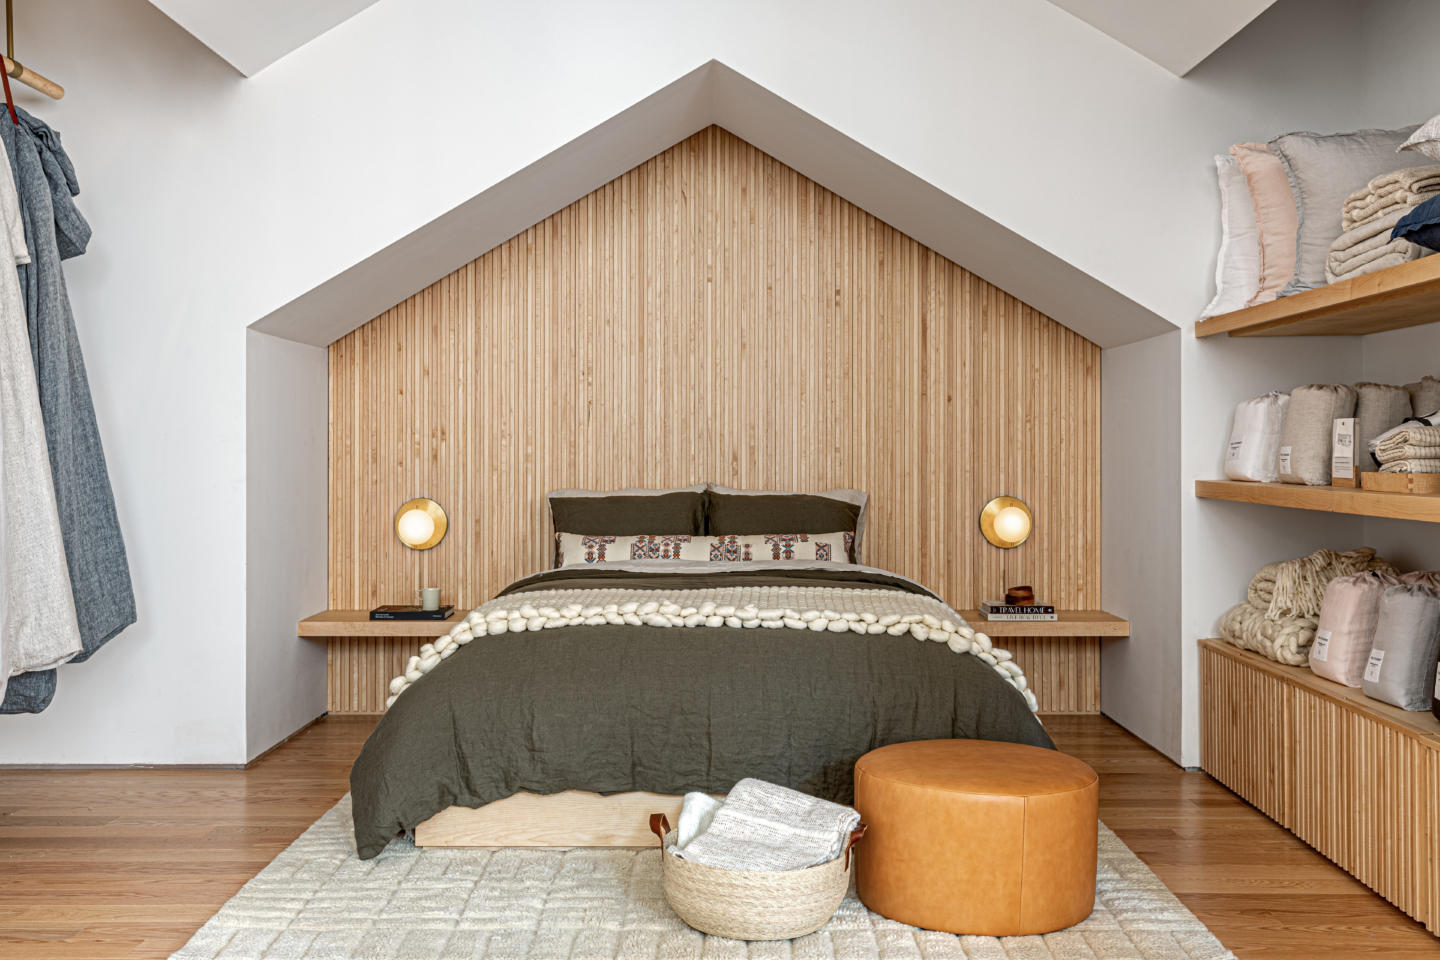 Bedroom Display with custom millwork and shelving at The Citizenry NYC 